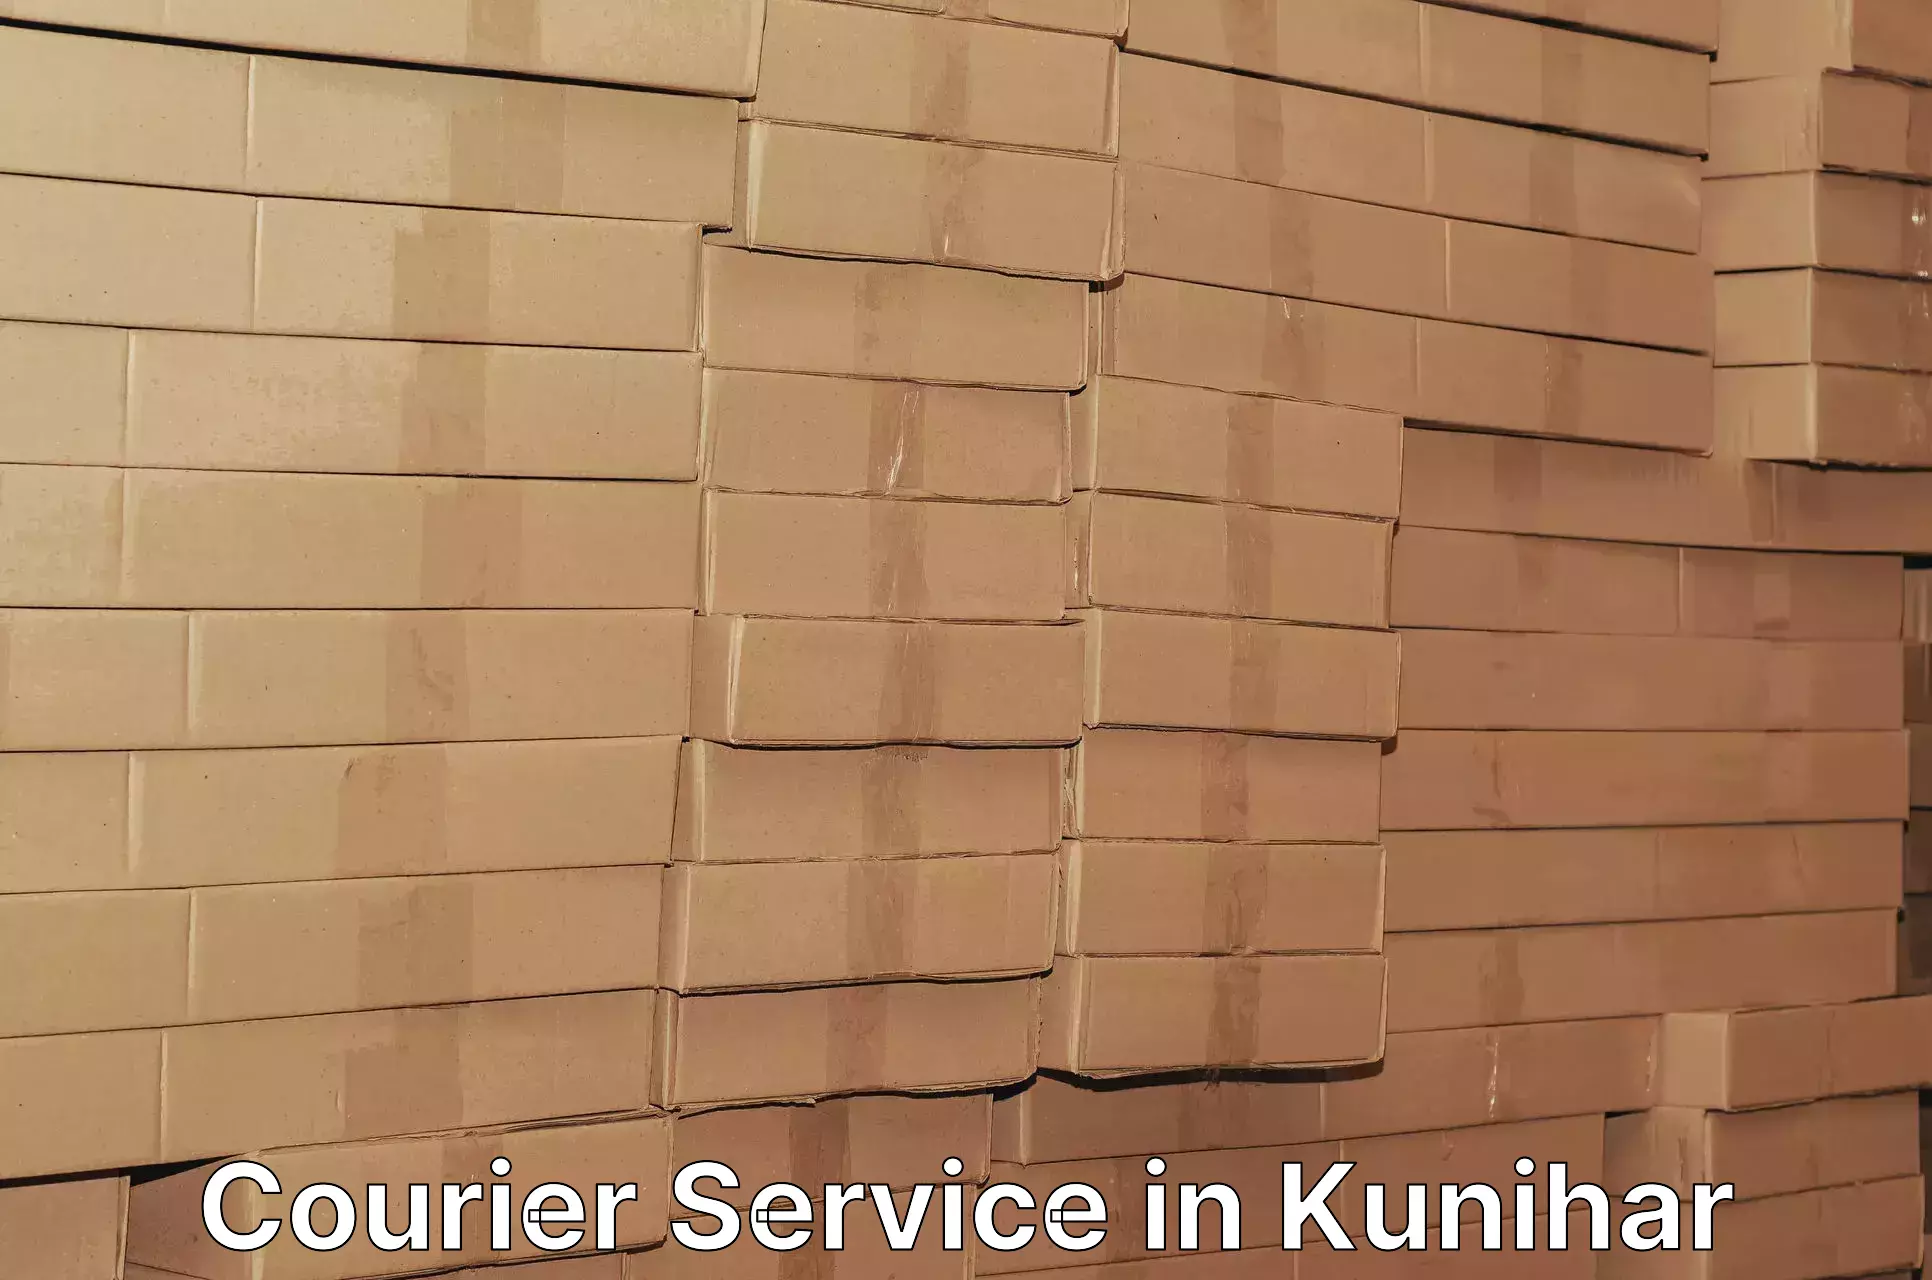 Customized shipping options in Kunihar